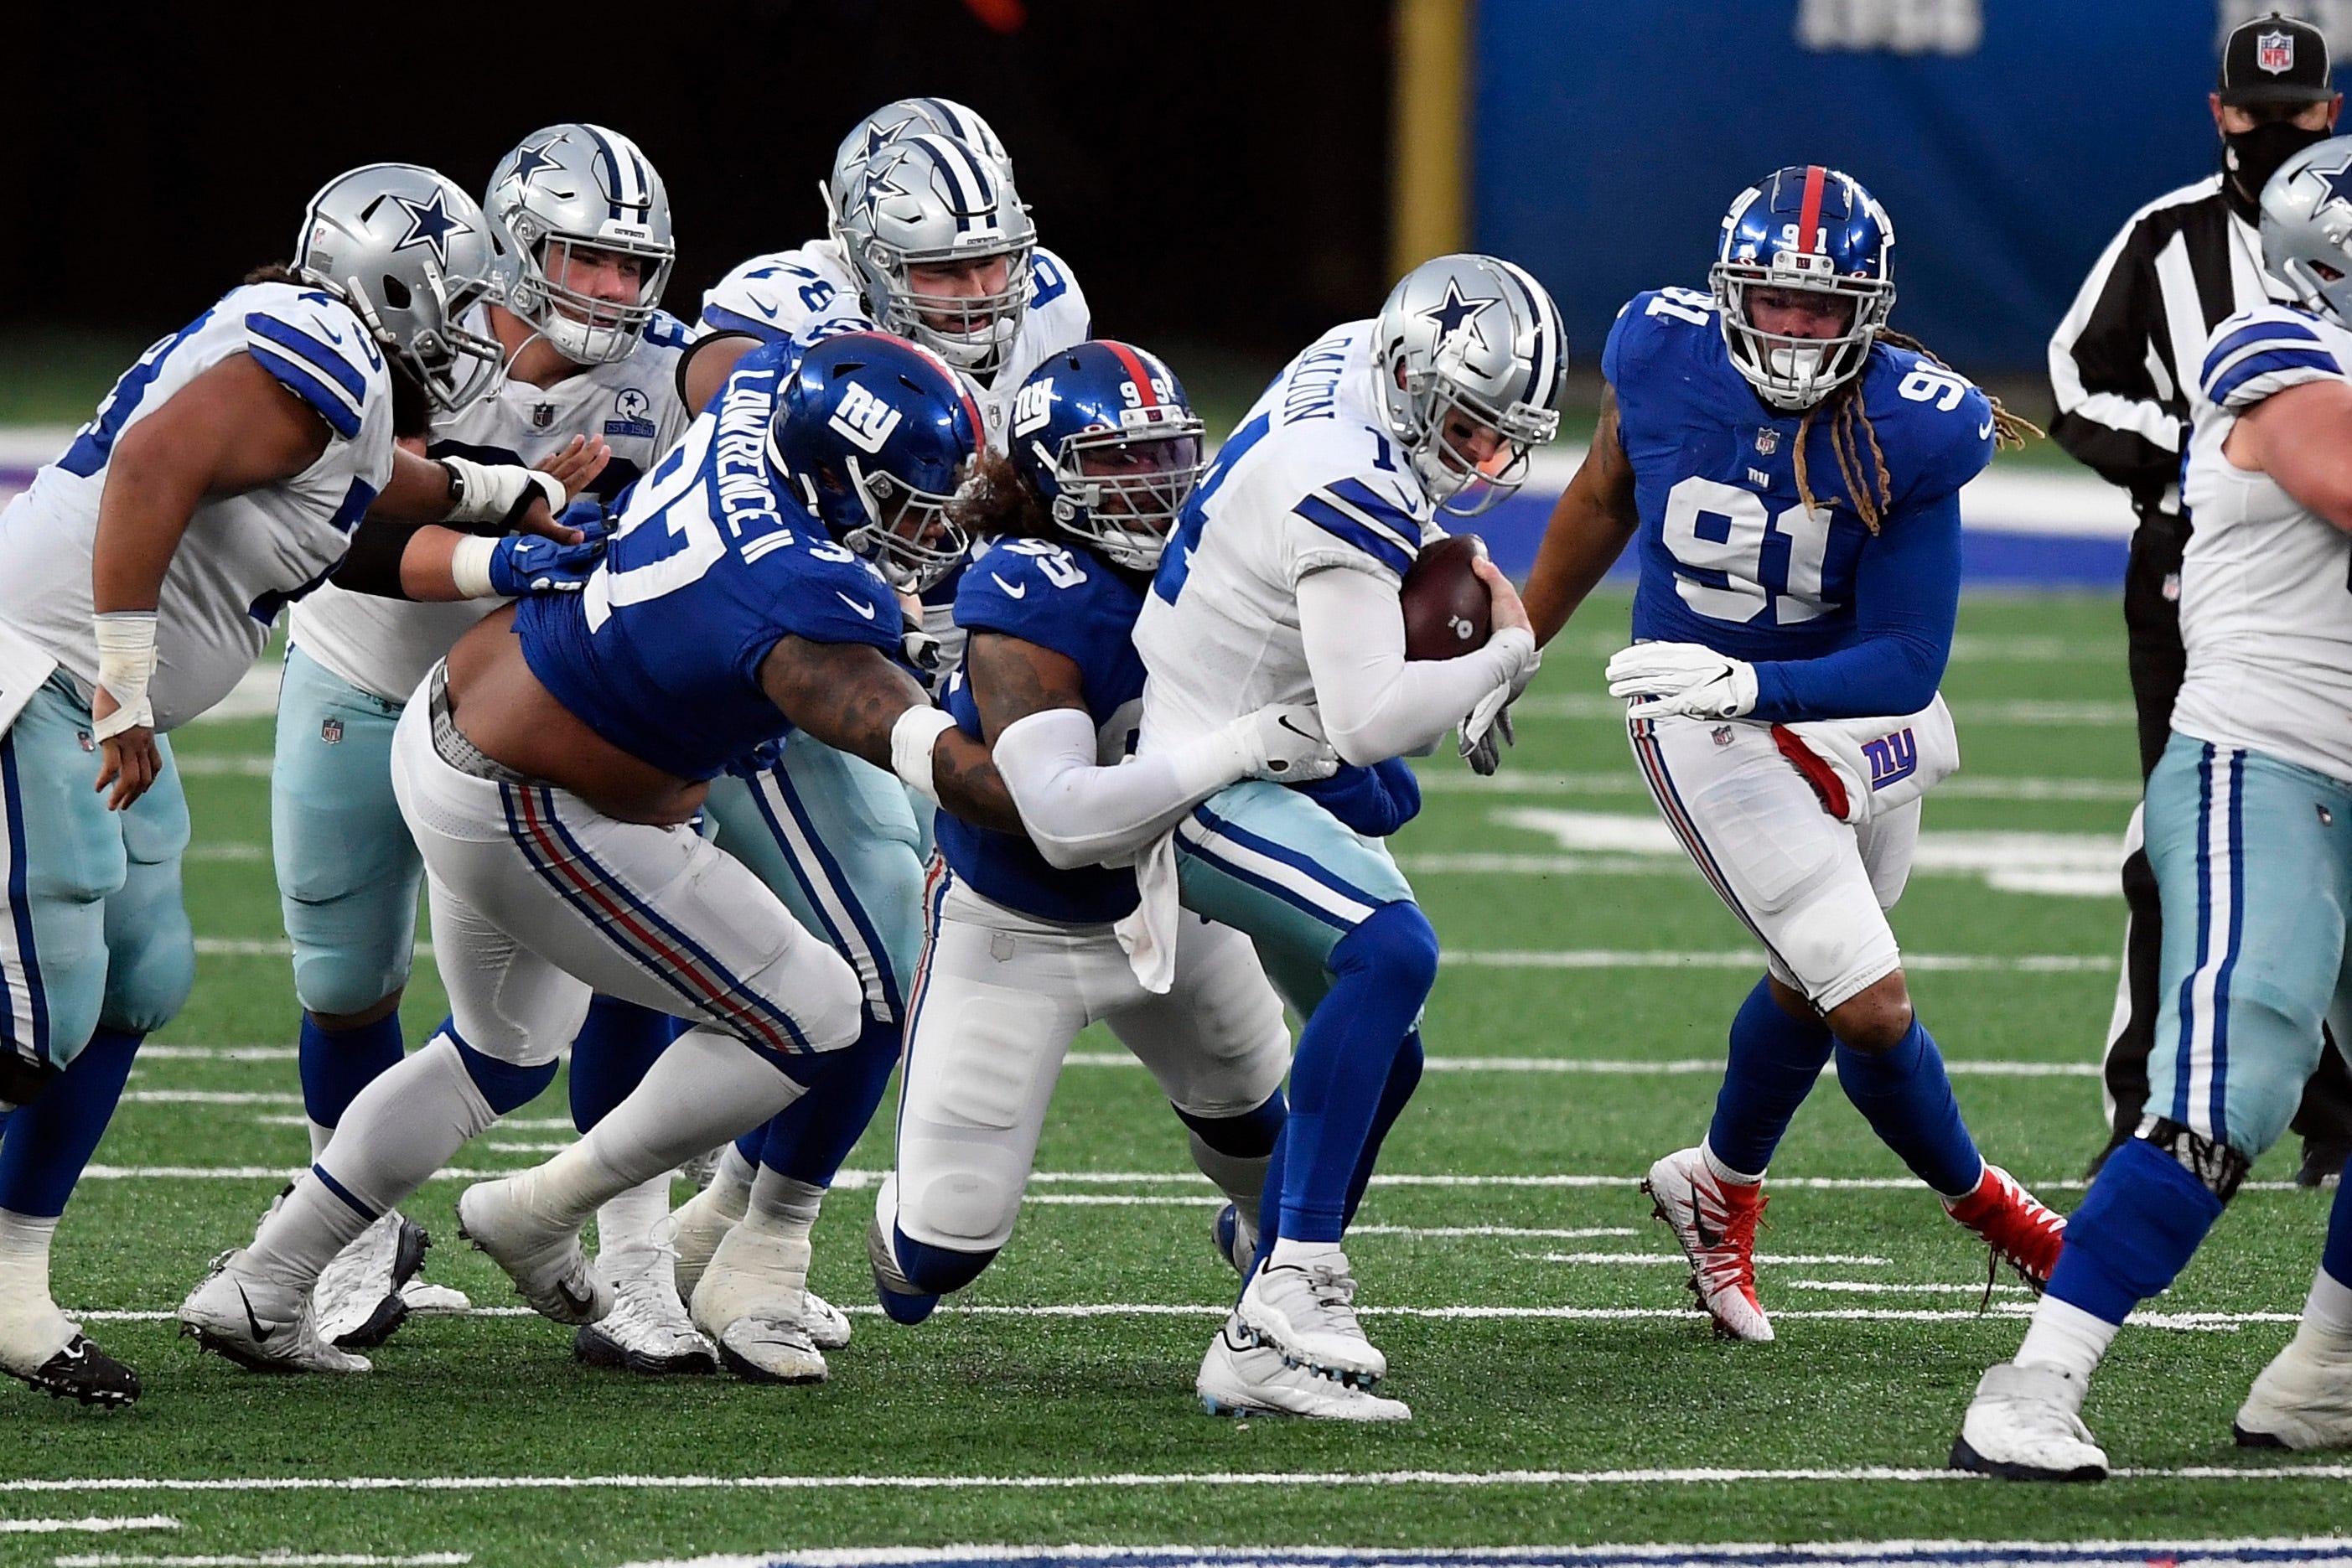 New York Giants defensive end Leonard Williams (99) sacks Dallas Cowboys quarterback Andy Dalton (14) in the second half. The Giants defeat the Cowboys, 23-19, at MetLife Stadium on Sunday, January 3, 2021, in East Rutherford. / Danielle Parhizkaran/NorthJersey.com via Imagn Content Services, LLC